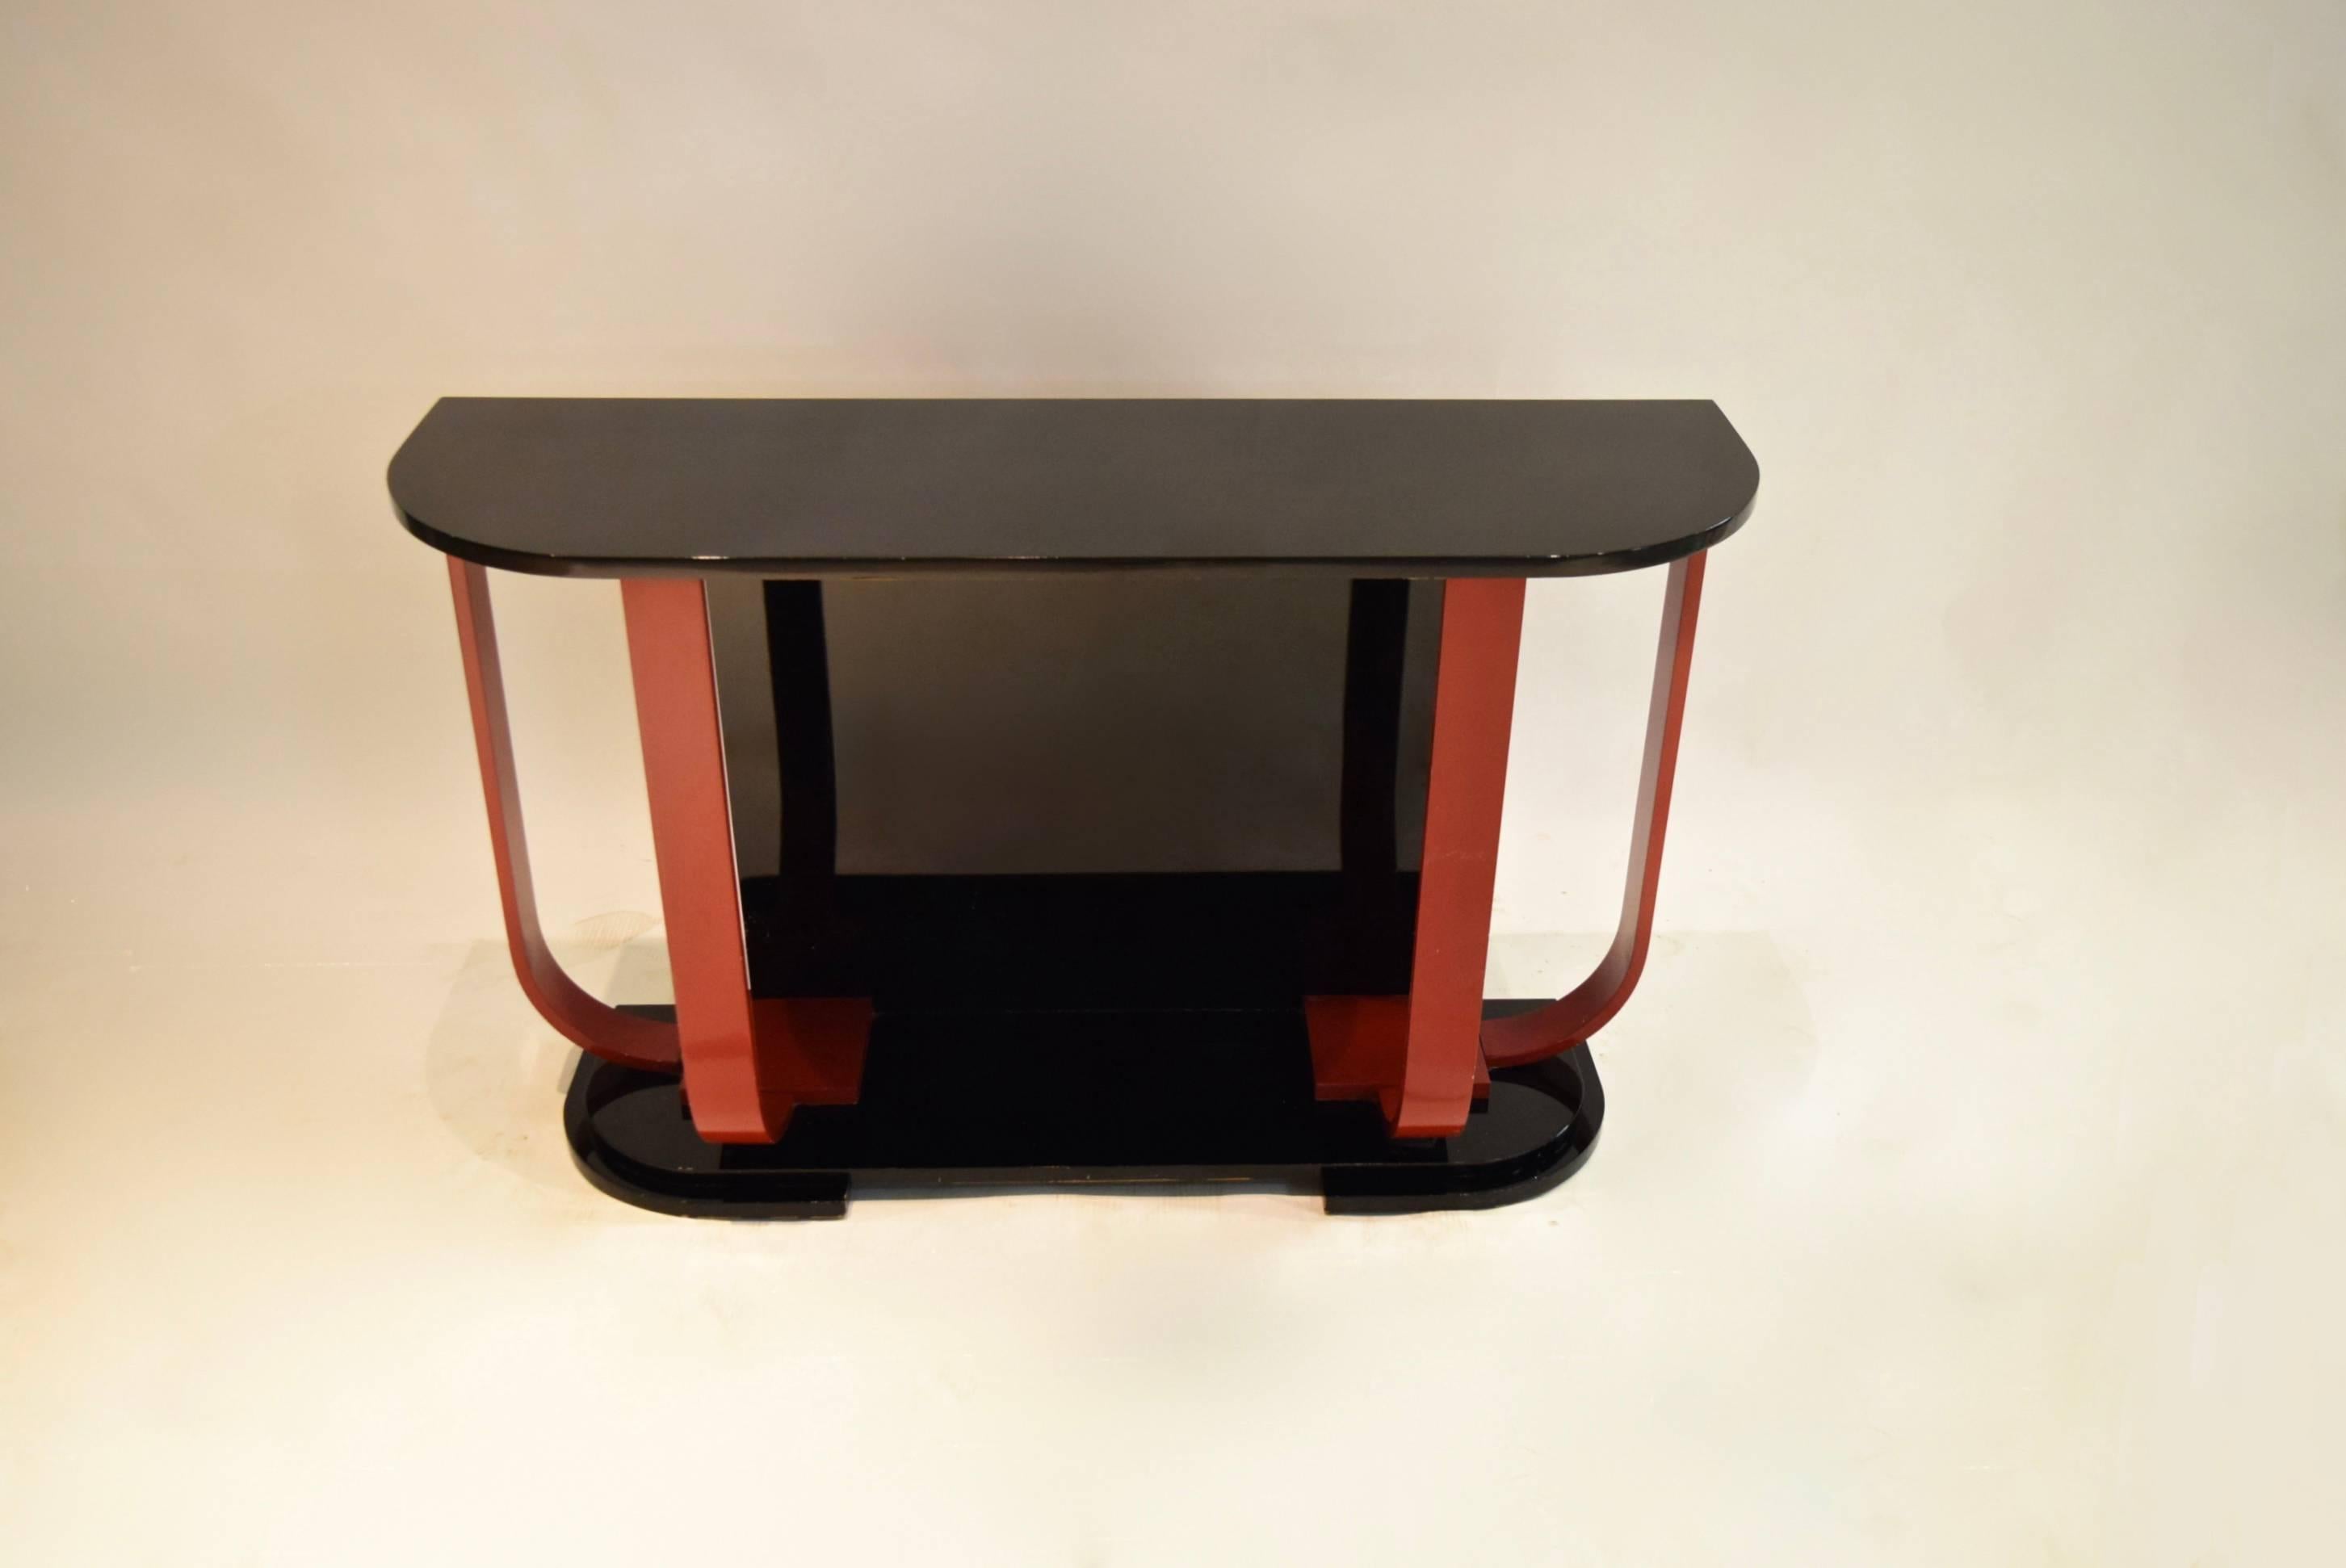 Standing console in black and red lacquered wood with two curved, posts on each side, and a tiered base.